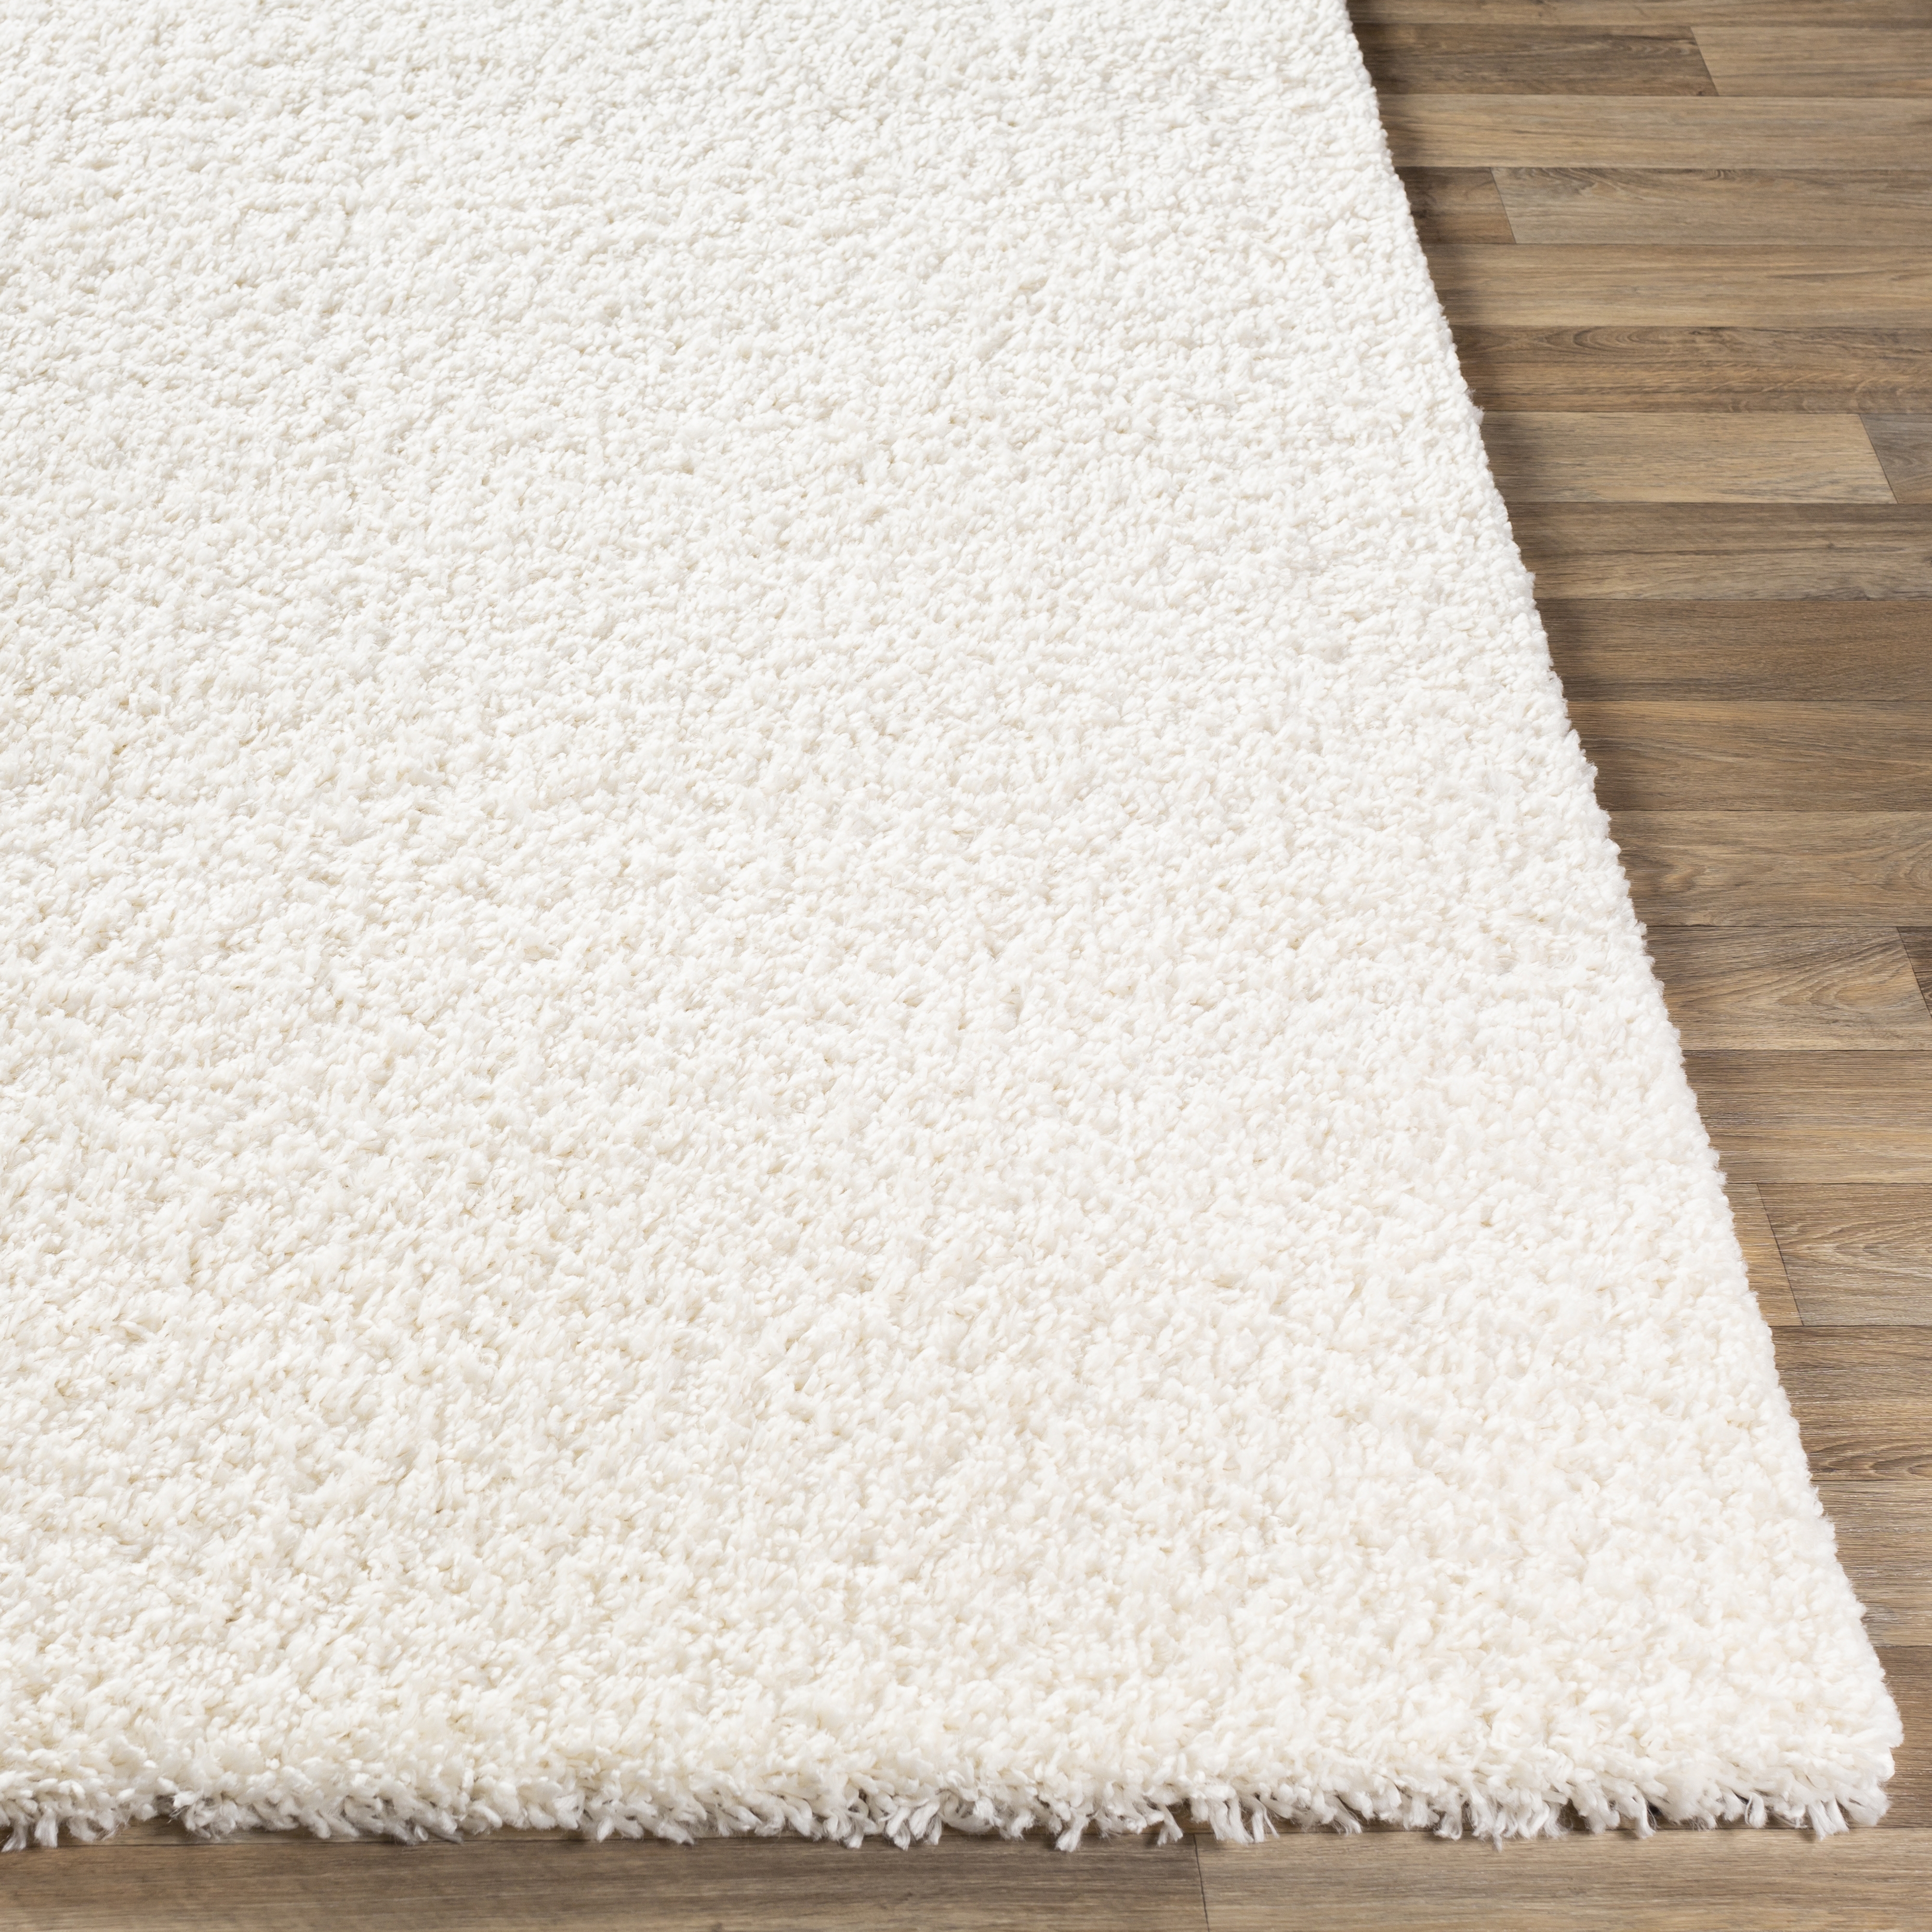 Deluxe Shag Rug, 8'10" x 12' - Image 2